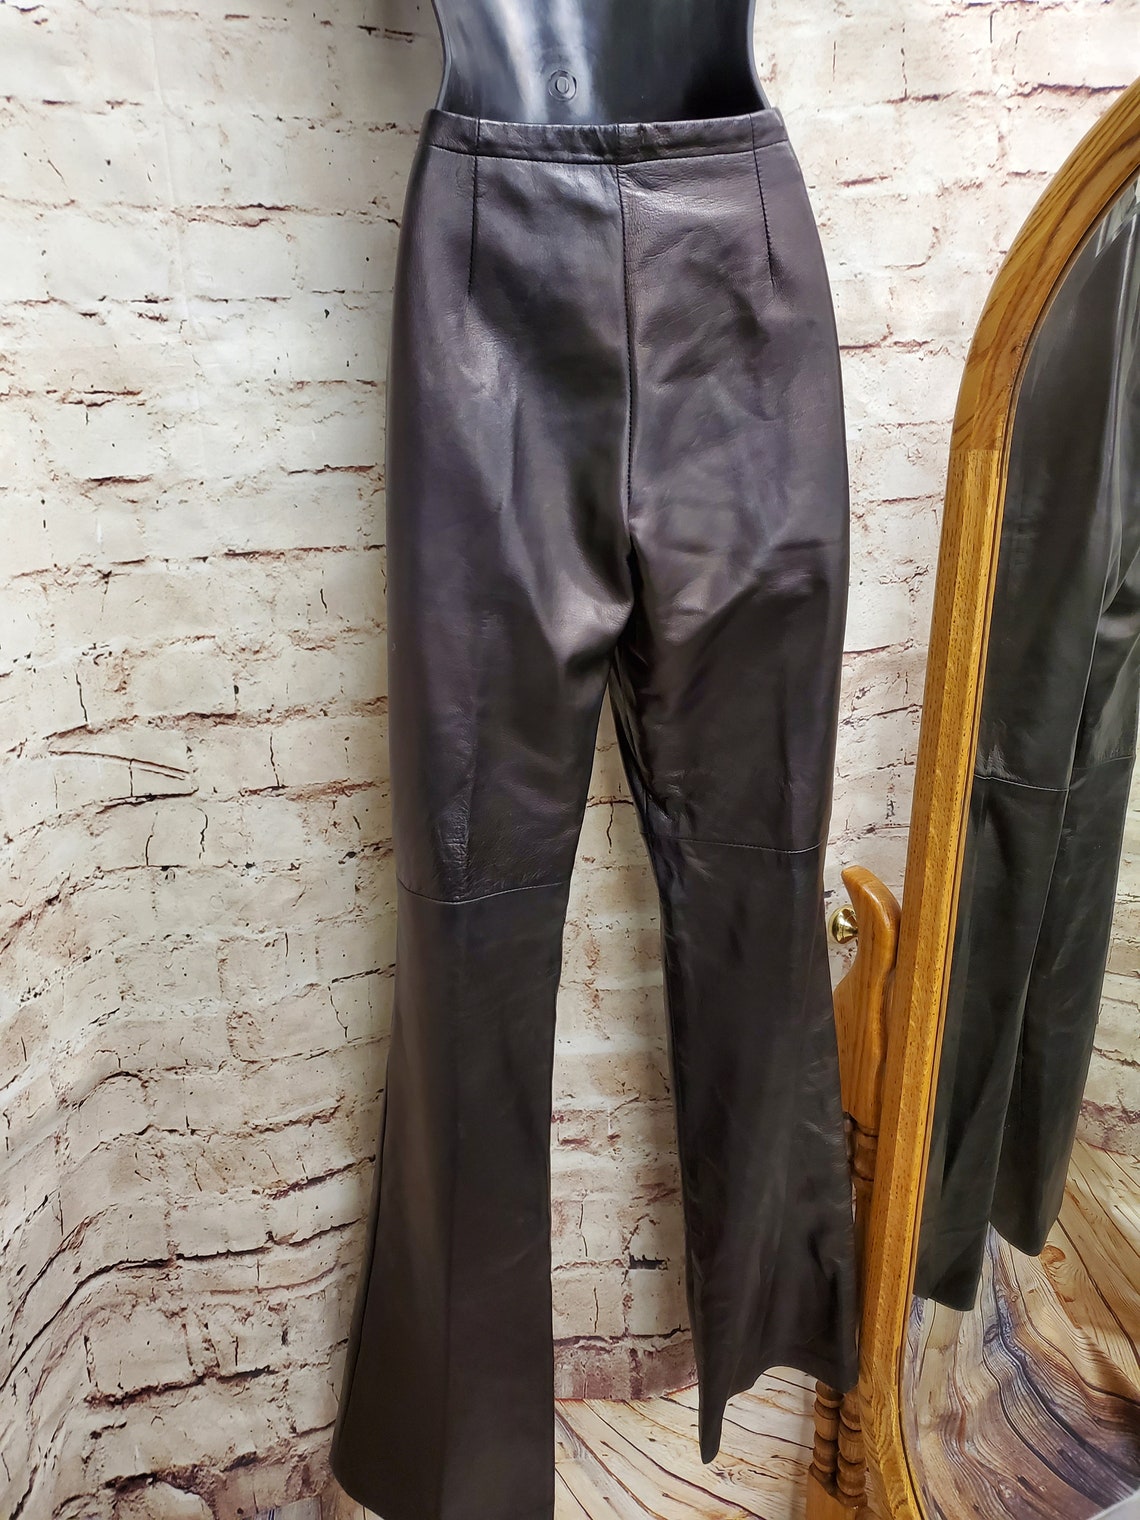 80s high waisted leather pants/ Danier leather made in Canada | Etsy